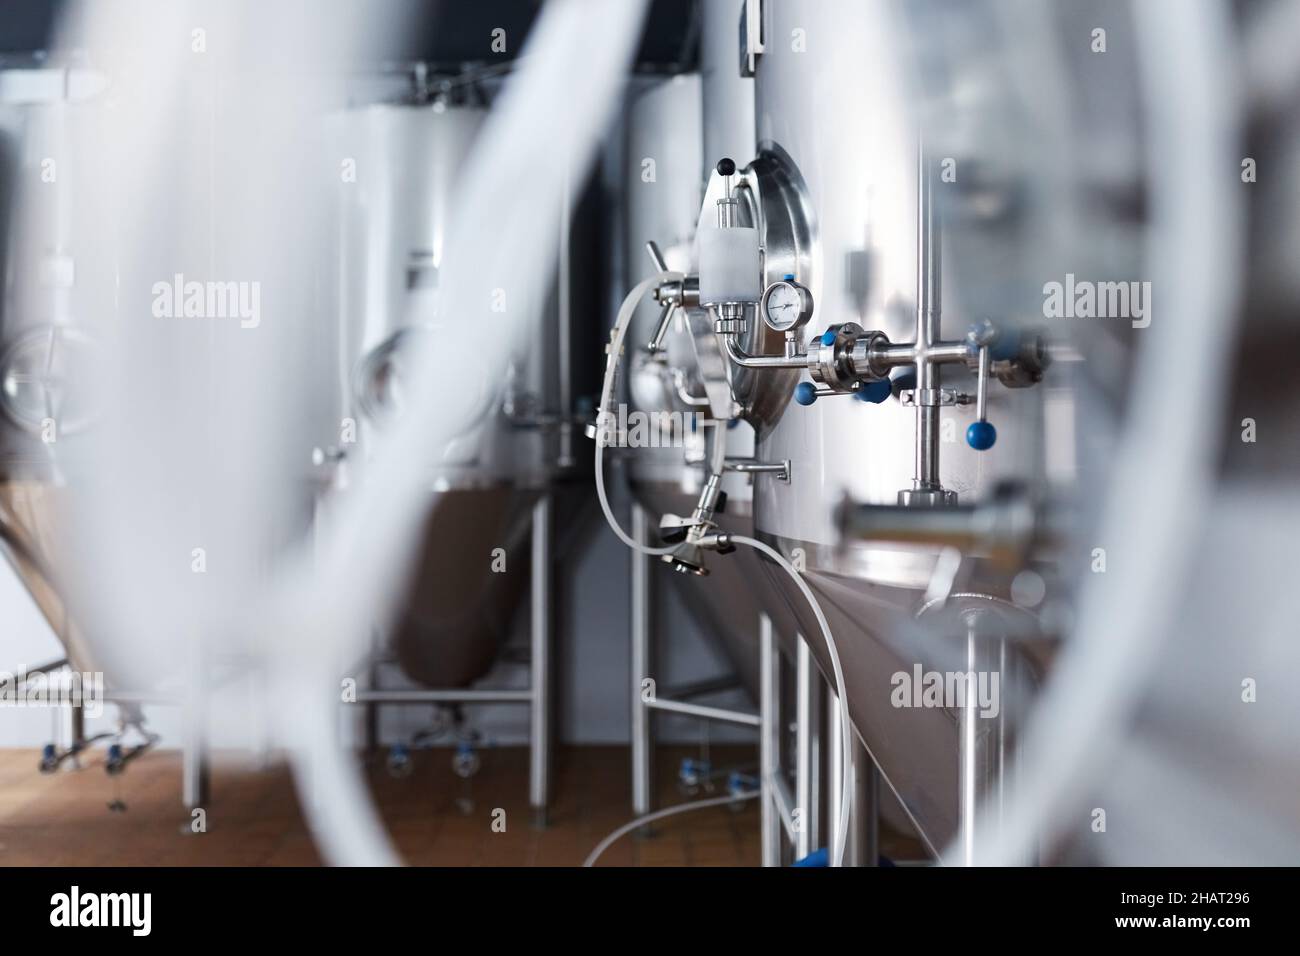 Equipment for the production of craft beer, containers for fermentation in the climatic chamber, pressure gauge with tubes and stainless steel tanks. Stock Photo